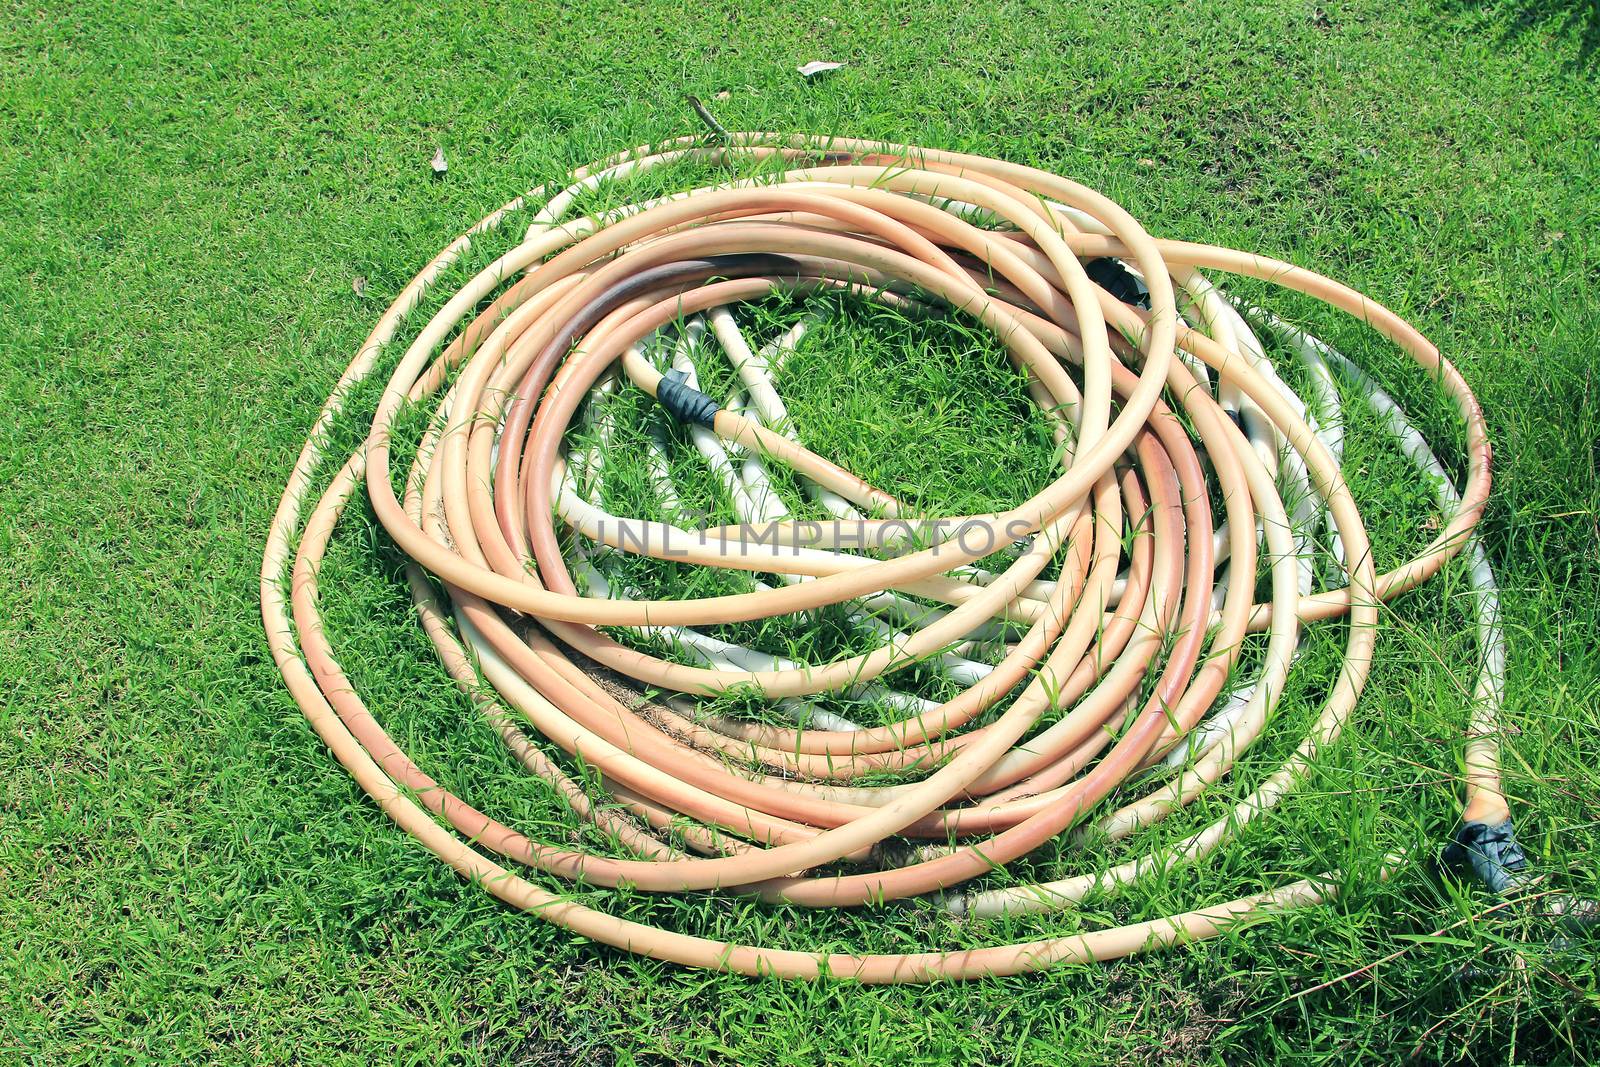 Old water hose